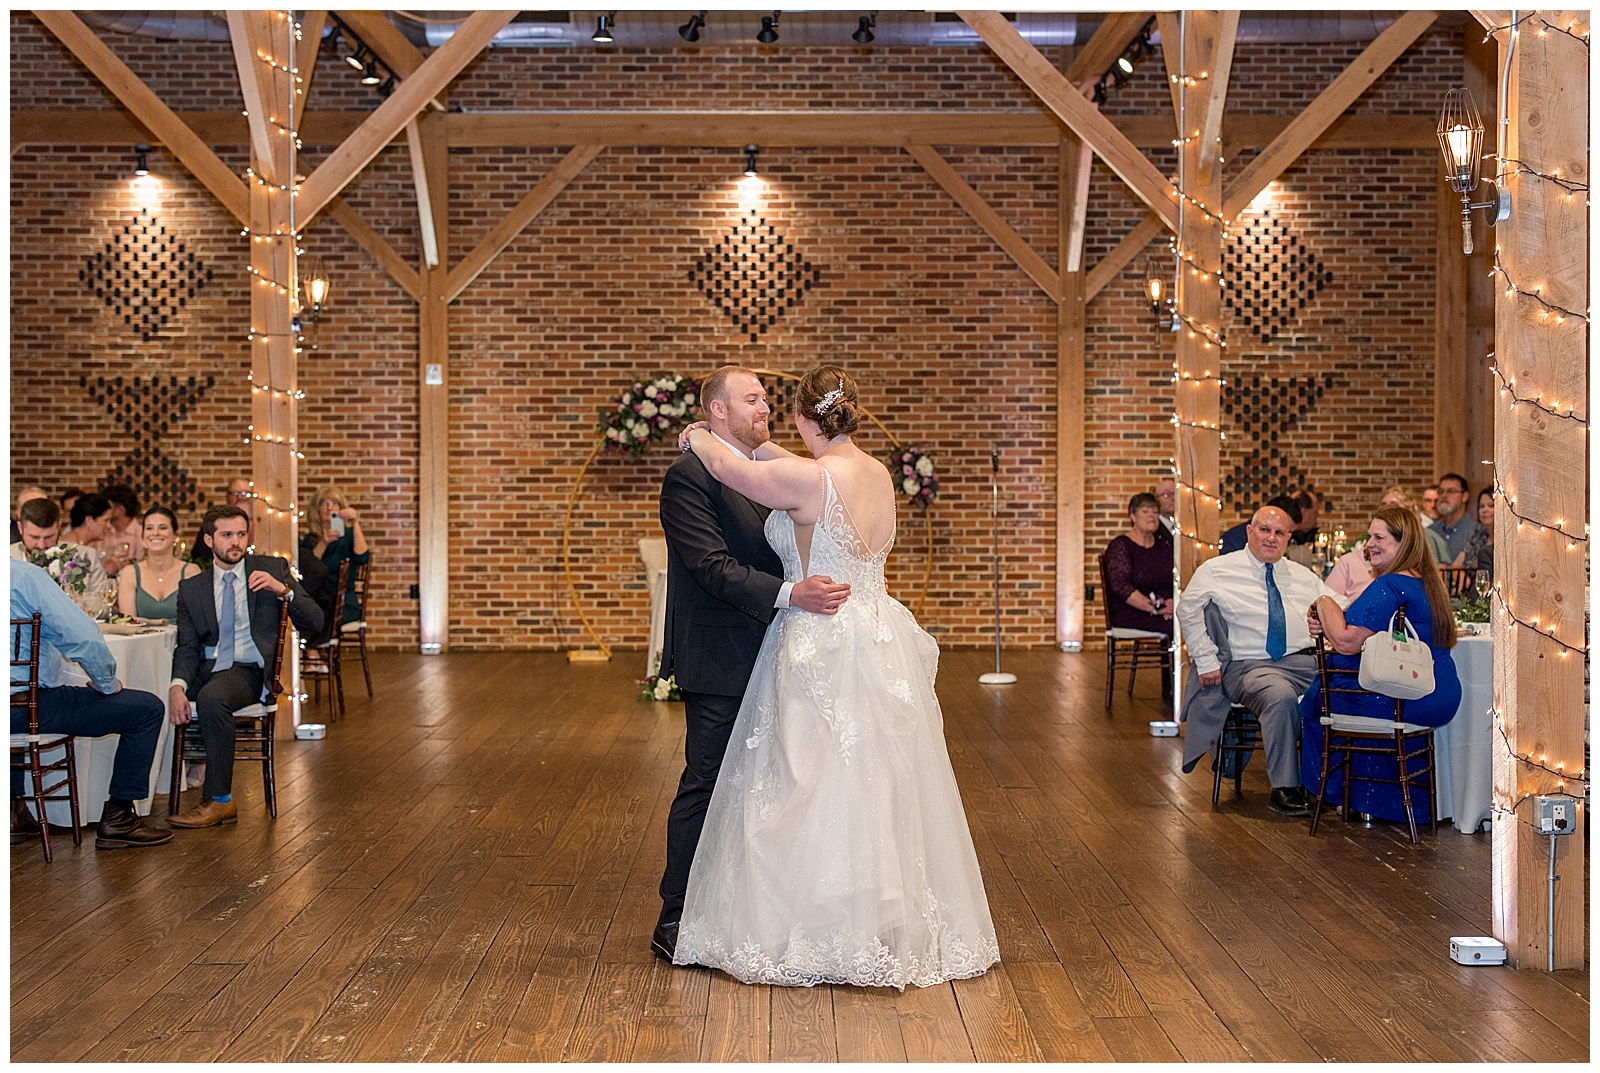 couple sharing their first dance during barn reception at brick gables as guests watch